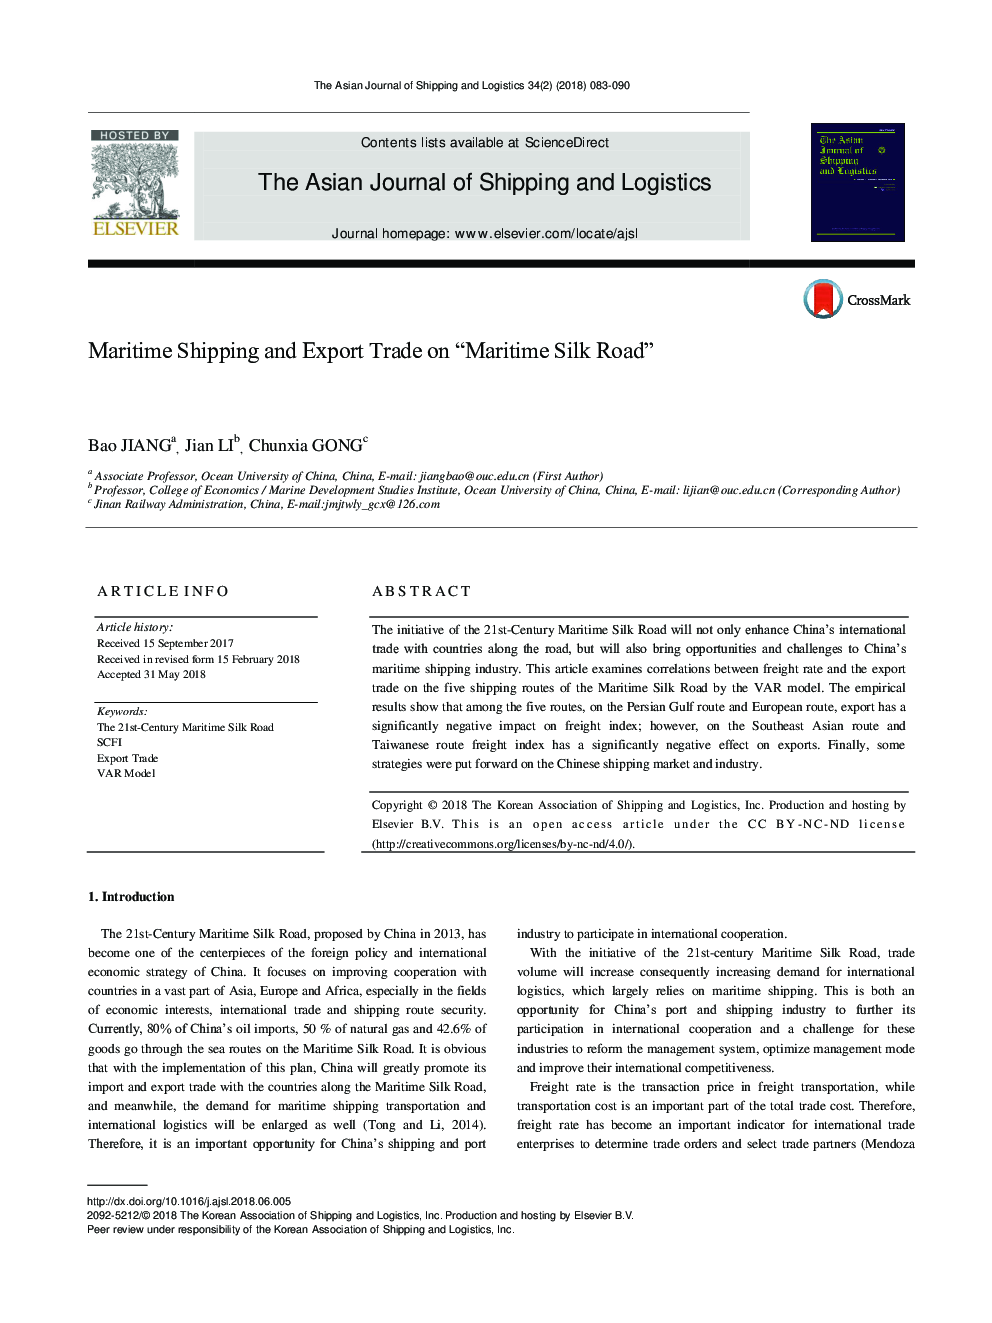 Maritime Shipping and Export Trade on “Maritime Silk Road”